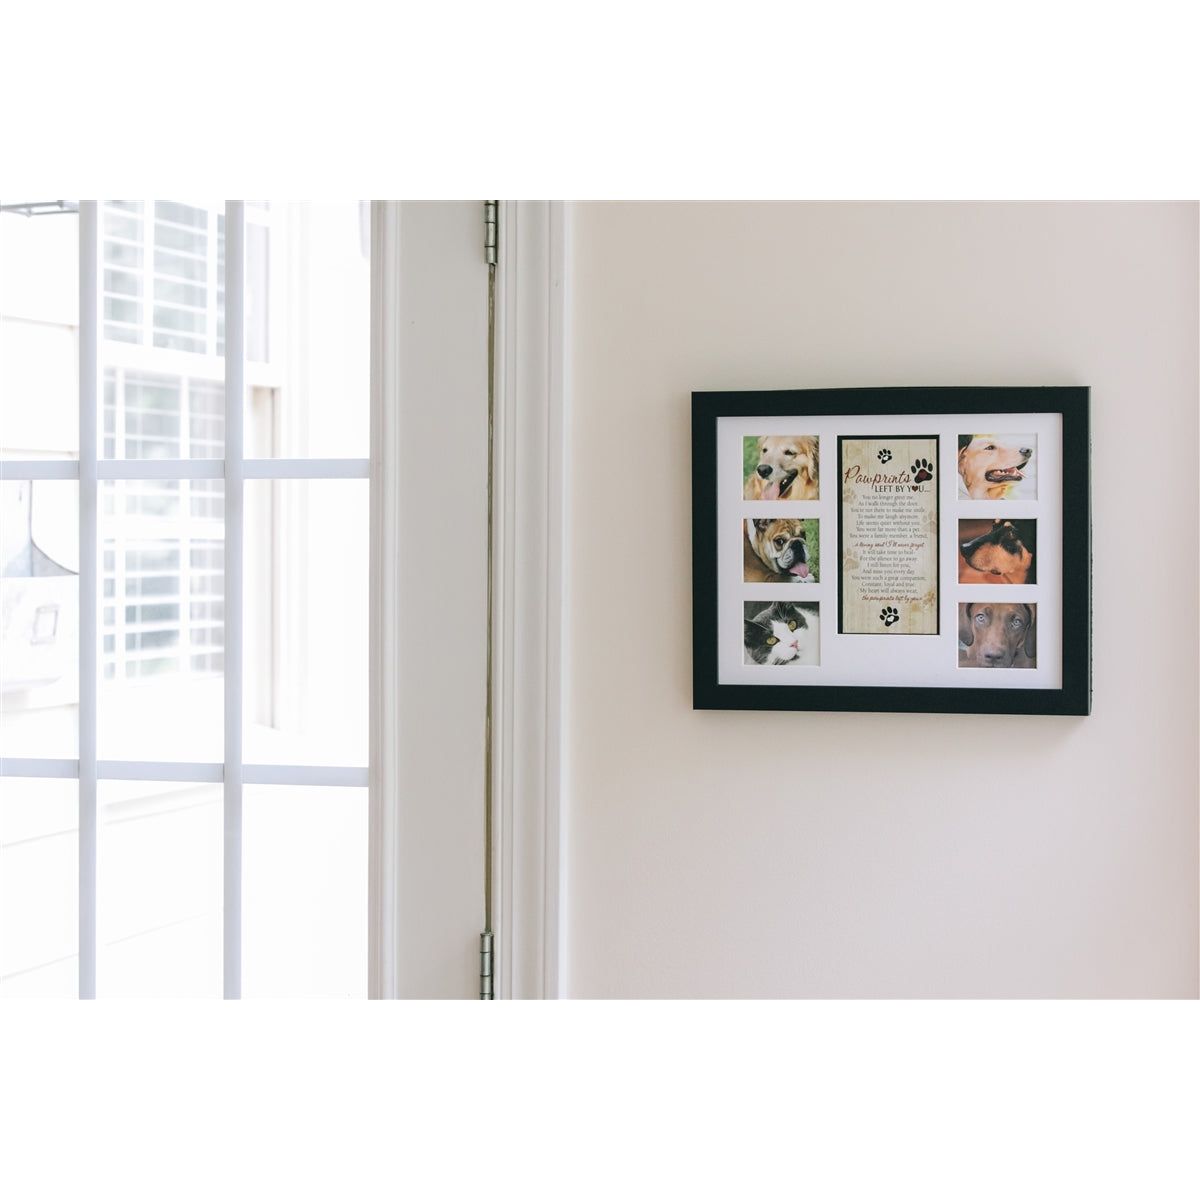 Pawprints Left by You Pet Collage Frame